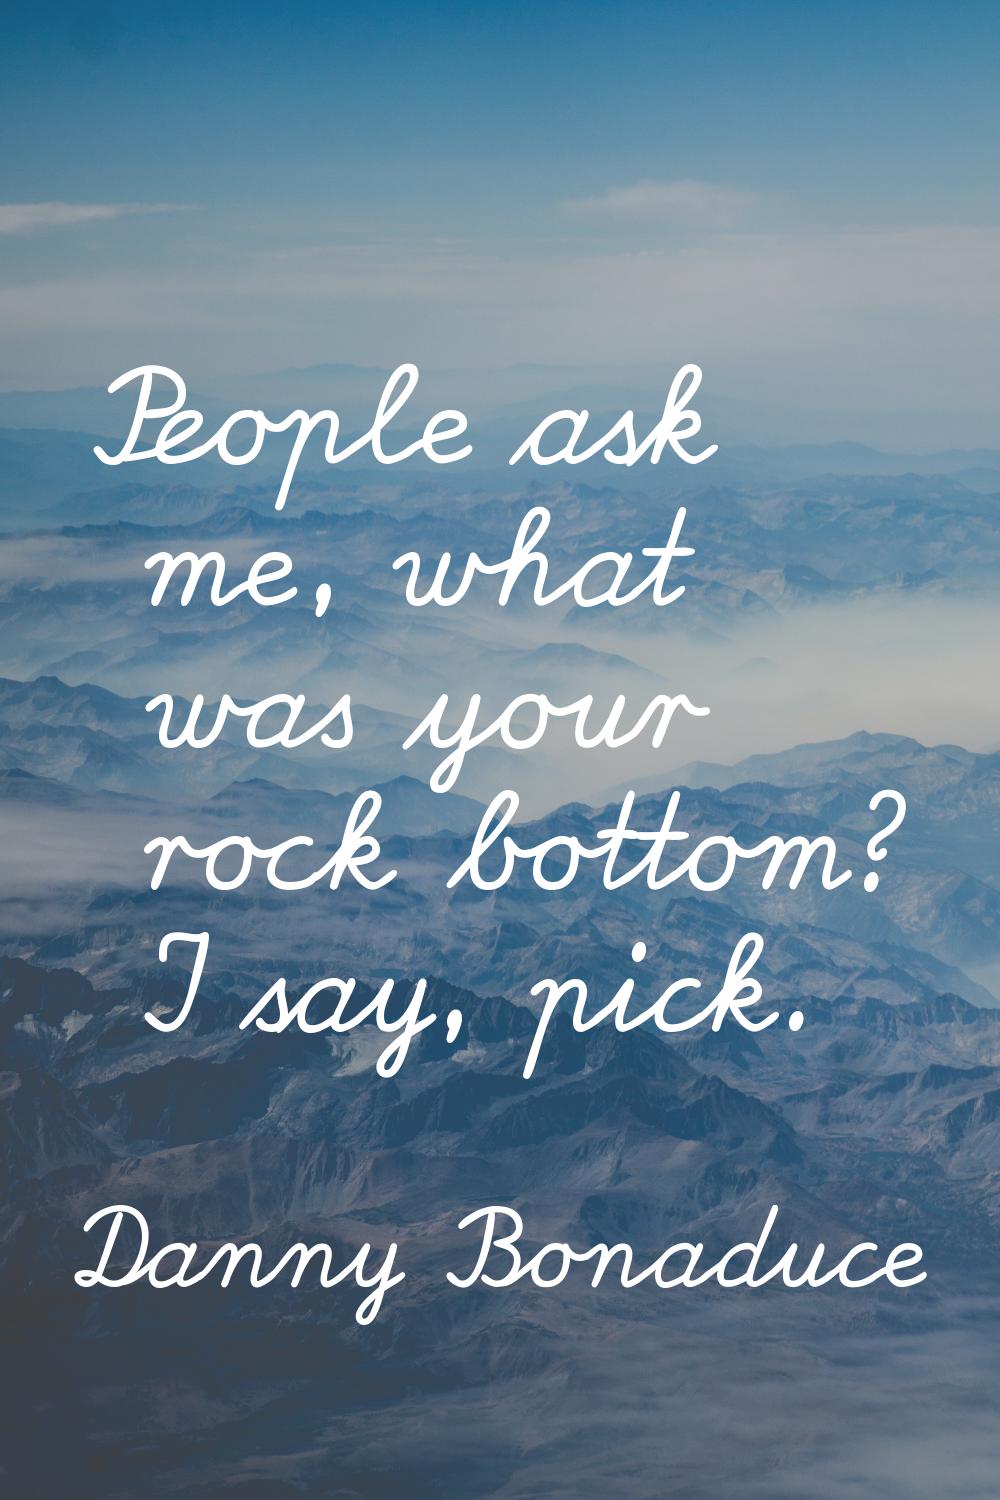 People ask me, what was your rock bottom? I say, pick.